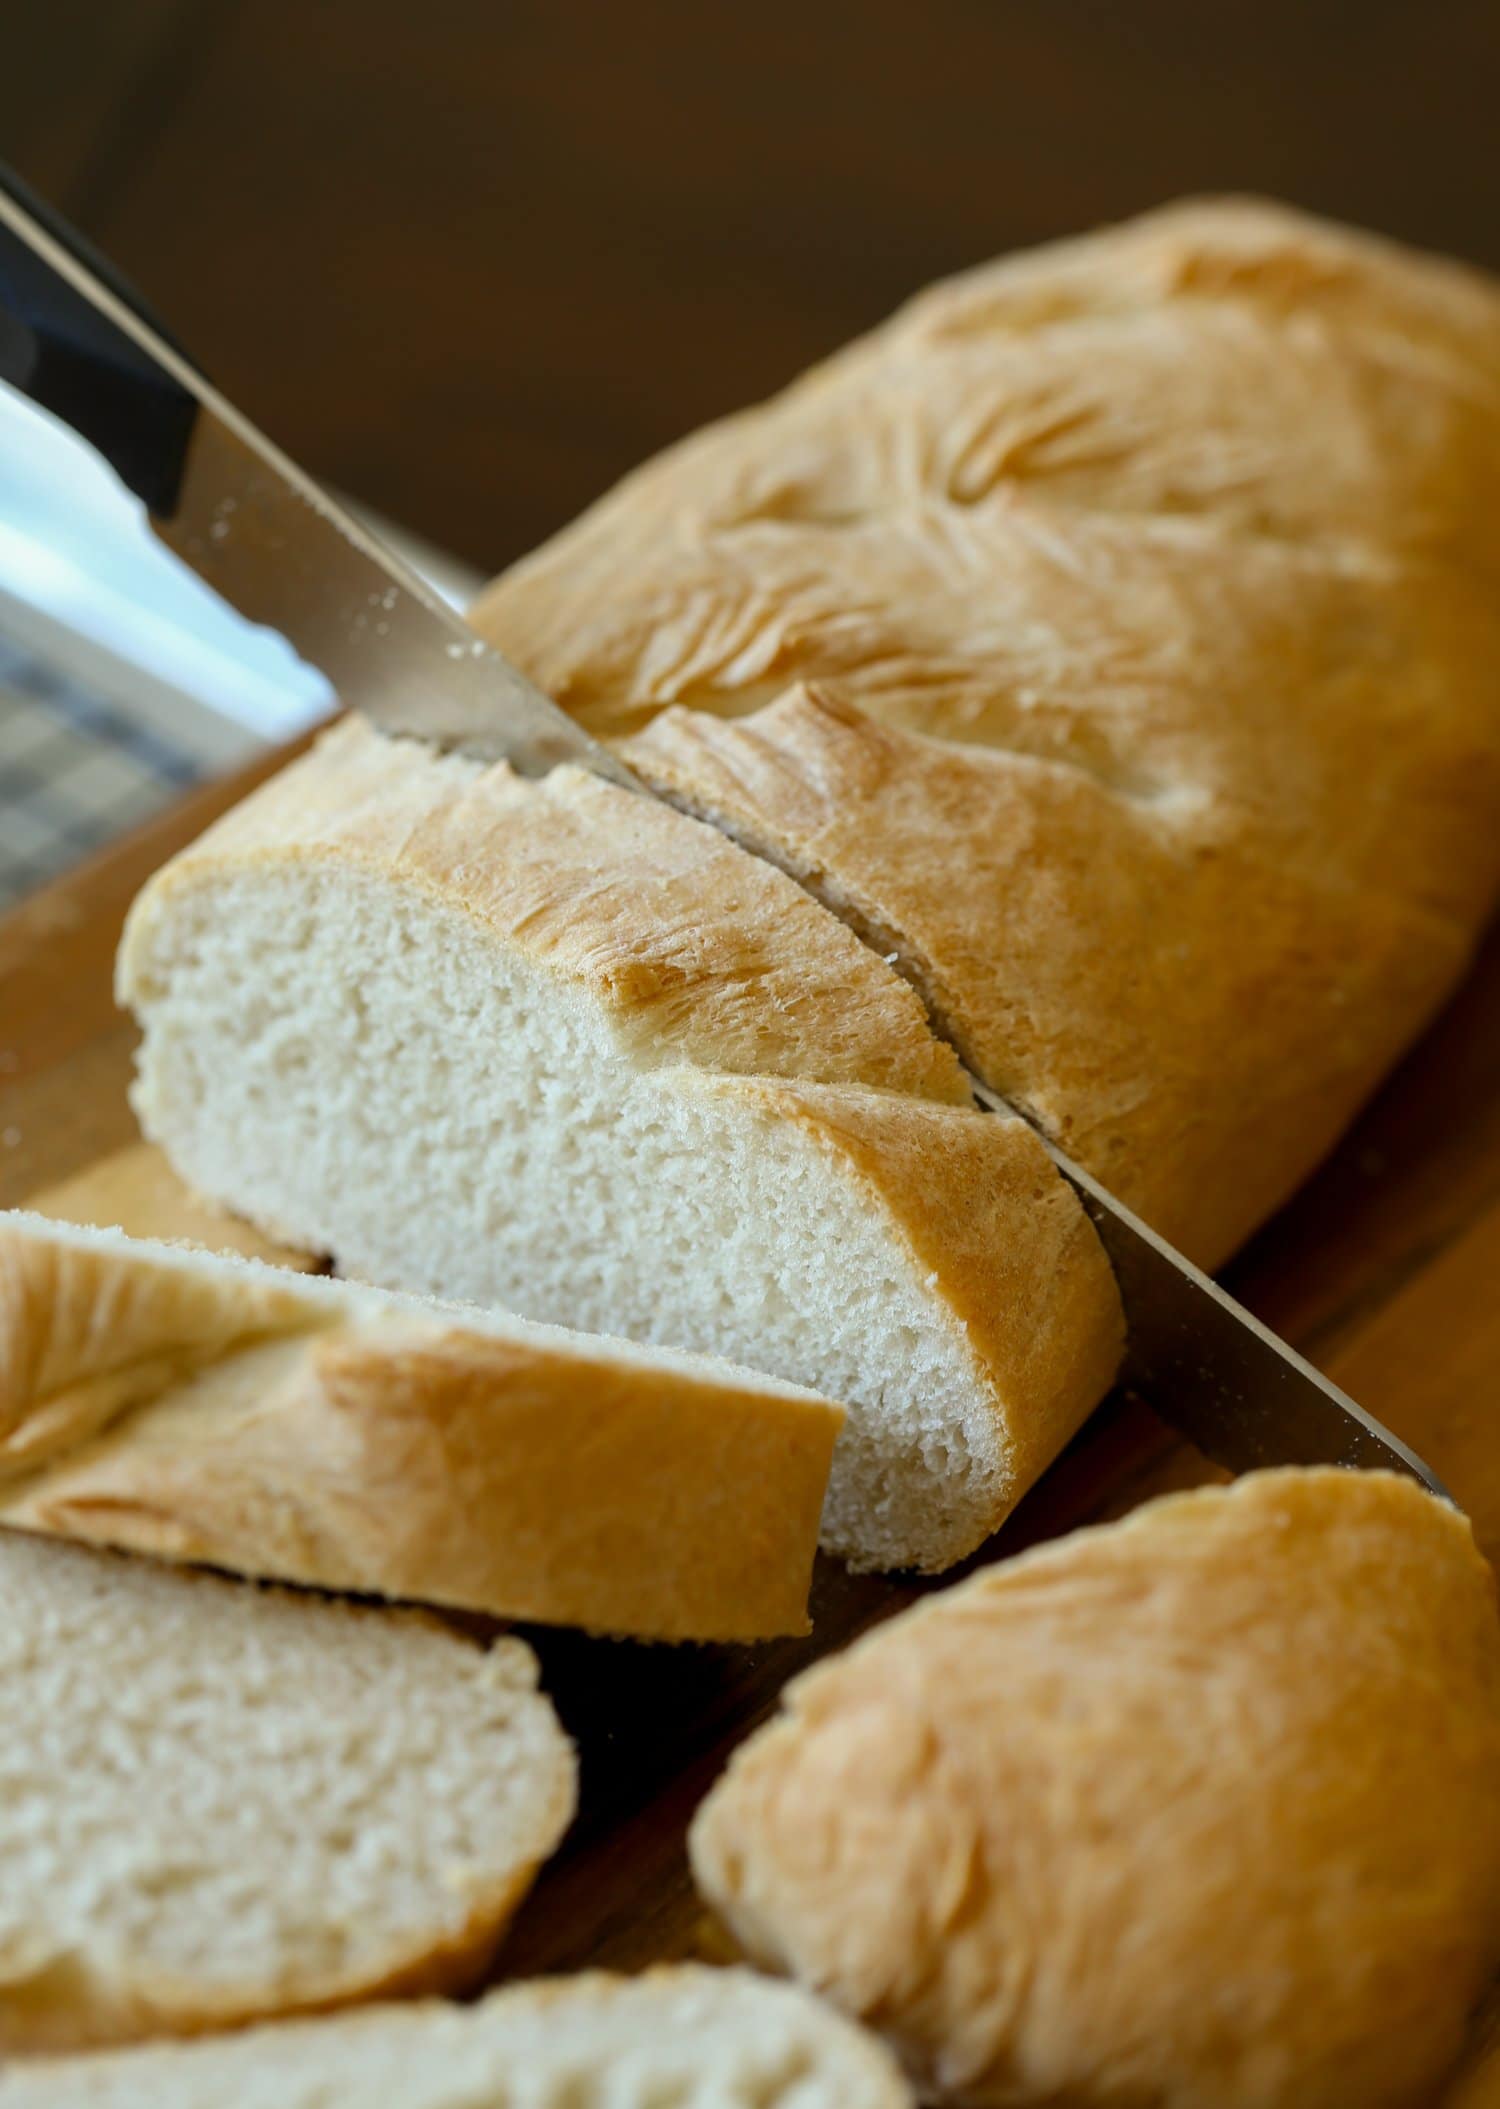 A loaf of French bread being sliced.